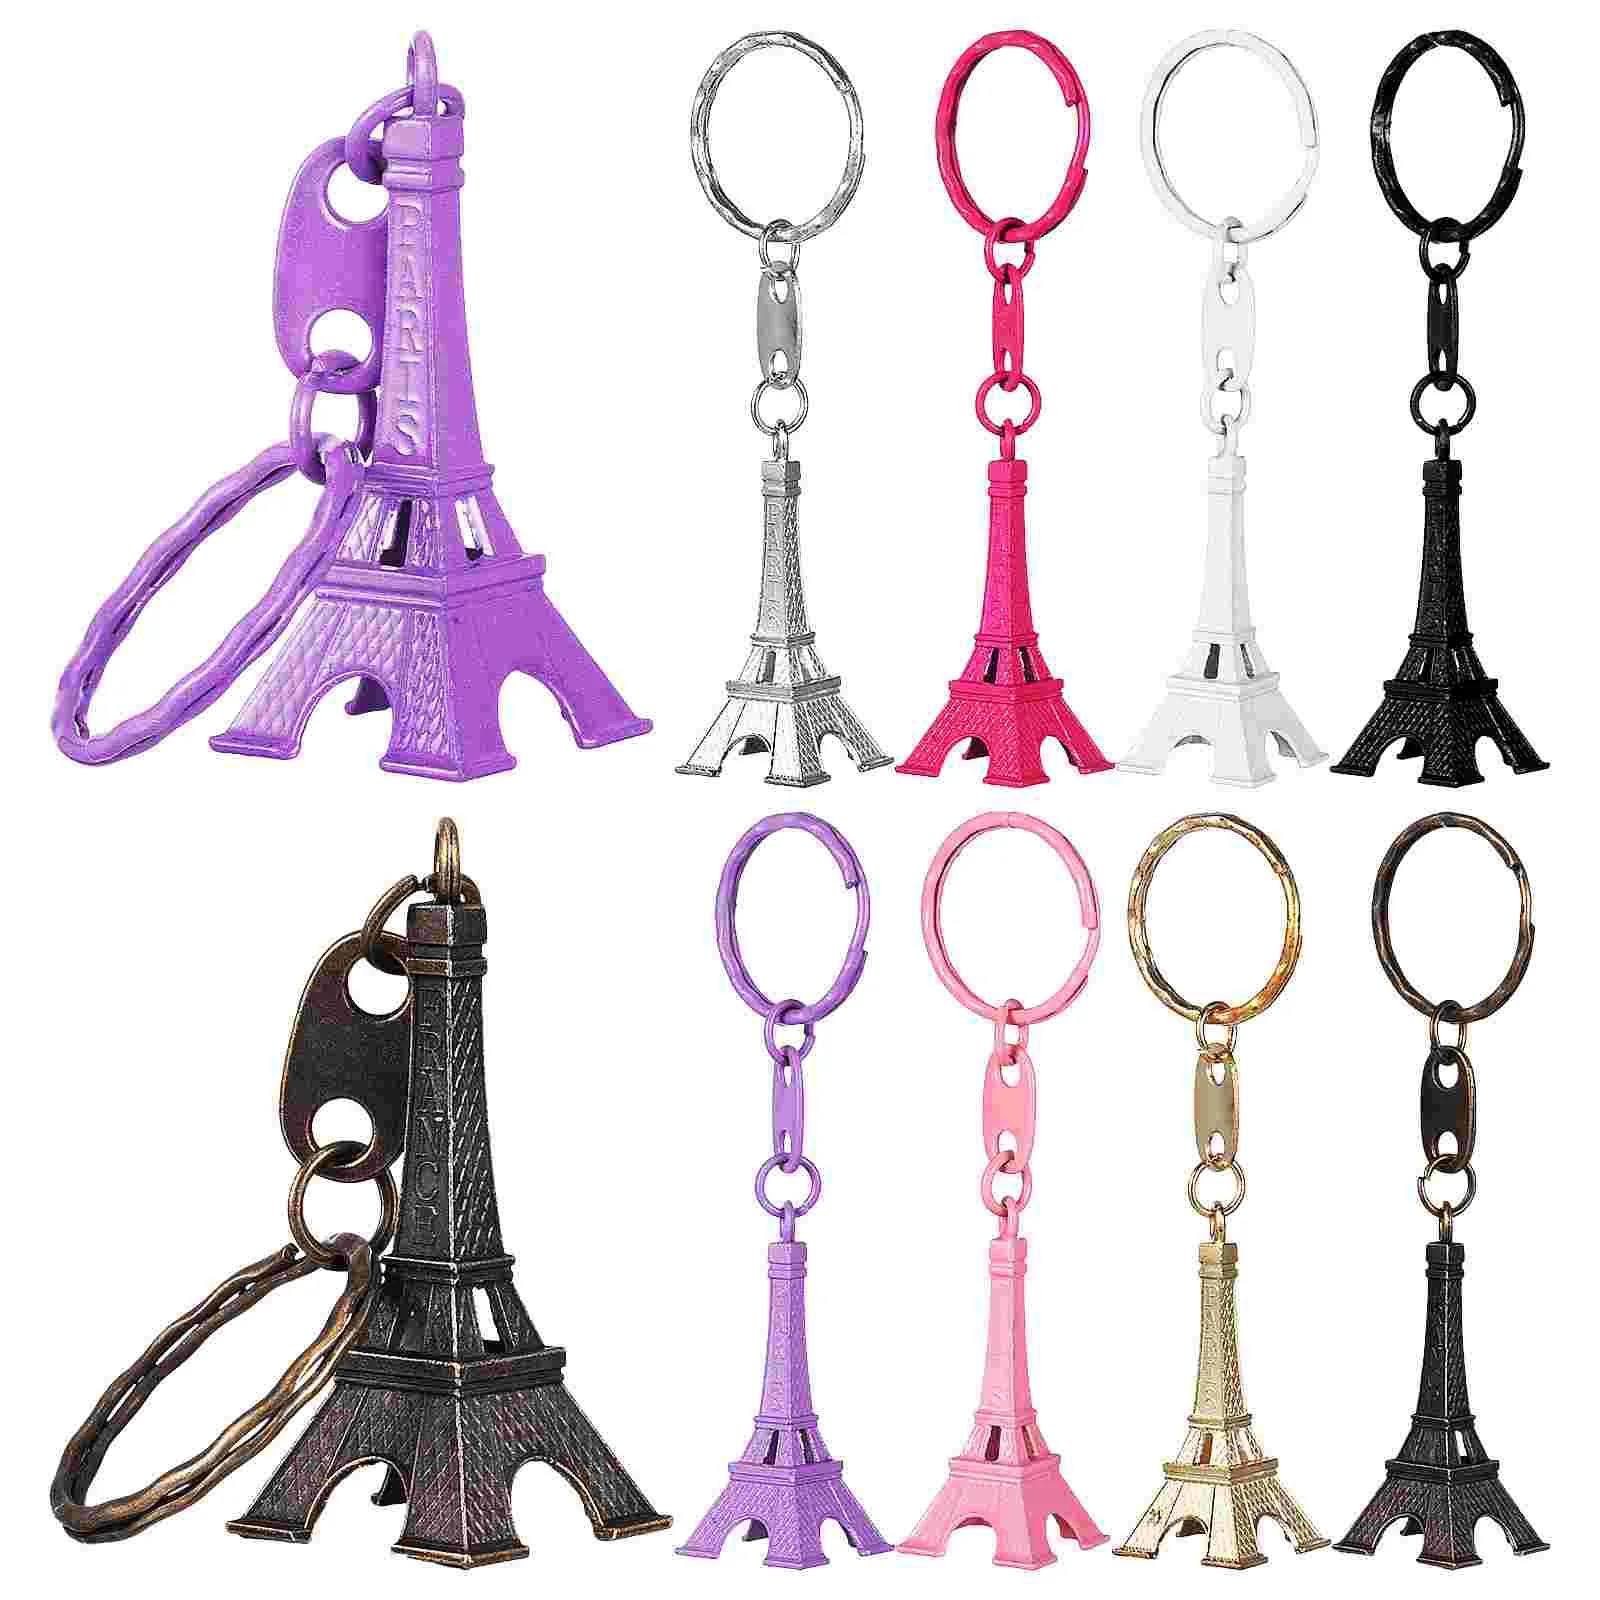 

32 Pcs Metal Key Chains Alloy Eiffel Tower Keychains Purse Hanging Decorations